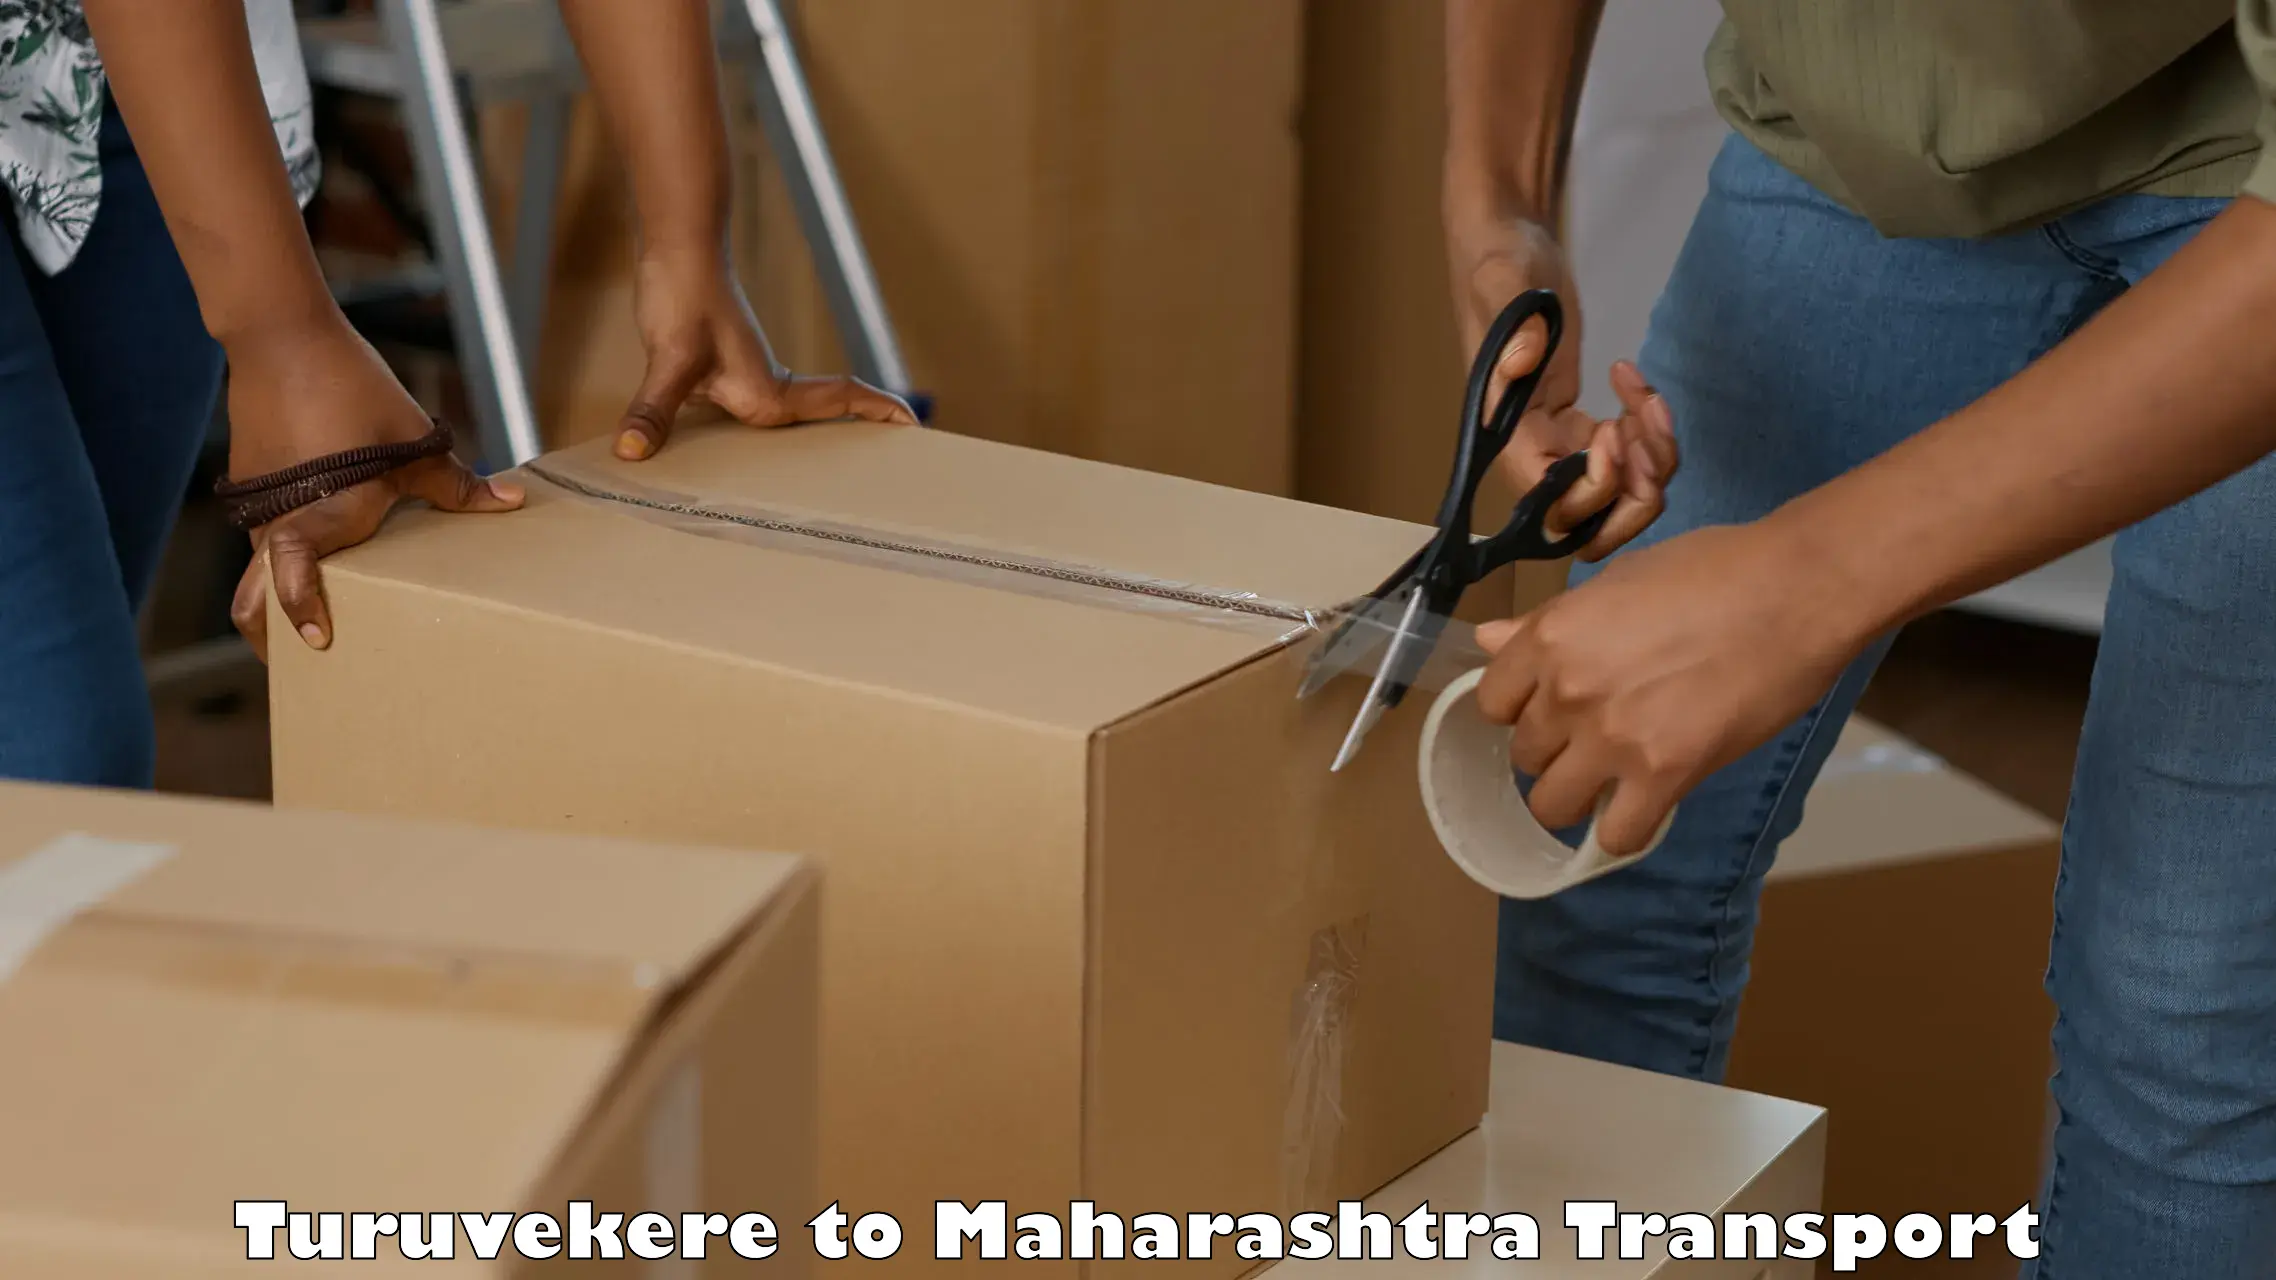 Lorry transport service in Turuvekere to DY Patil Vidyapeeth Pune